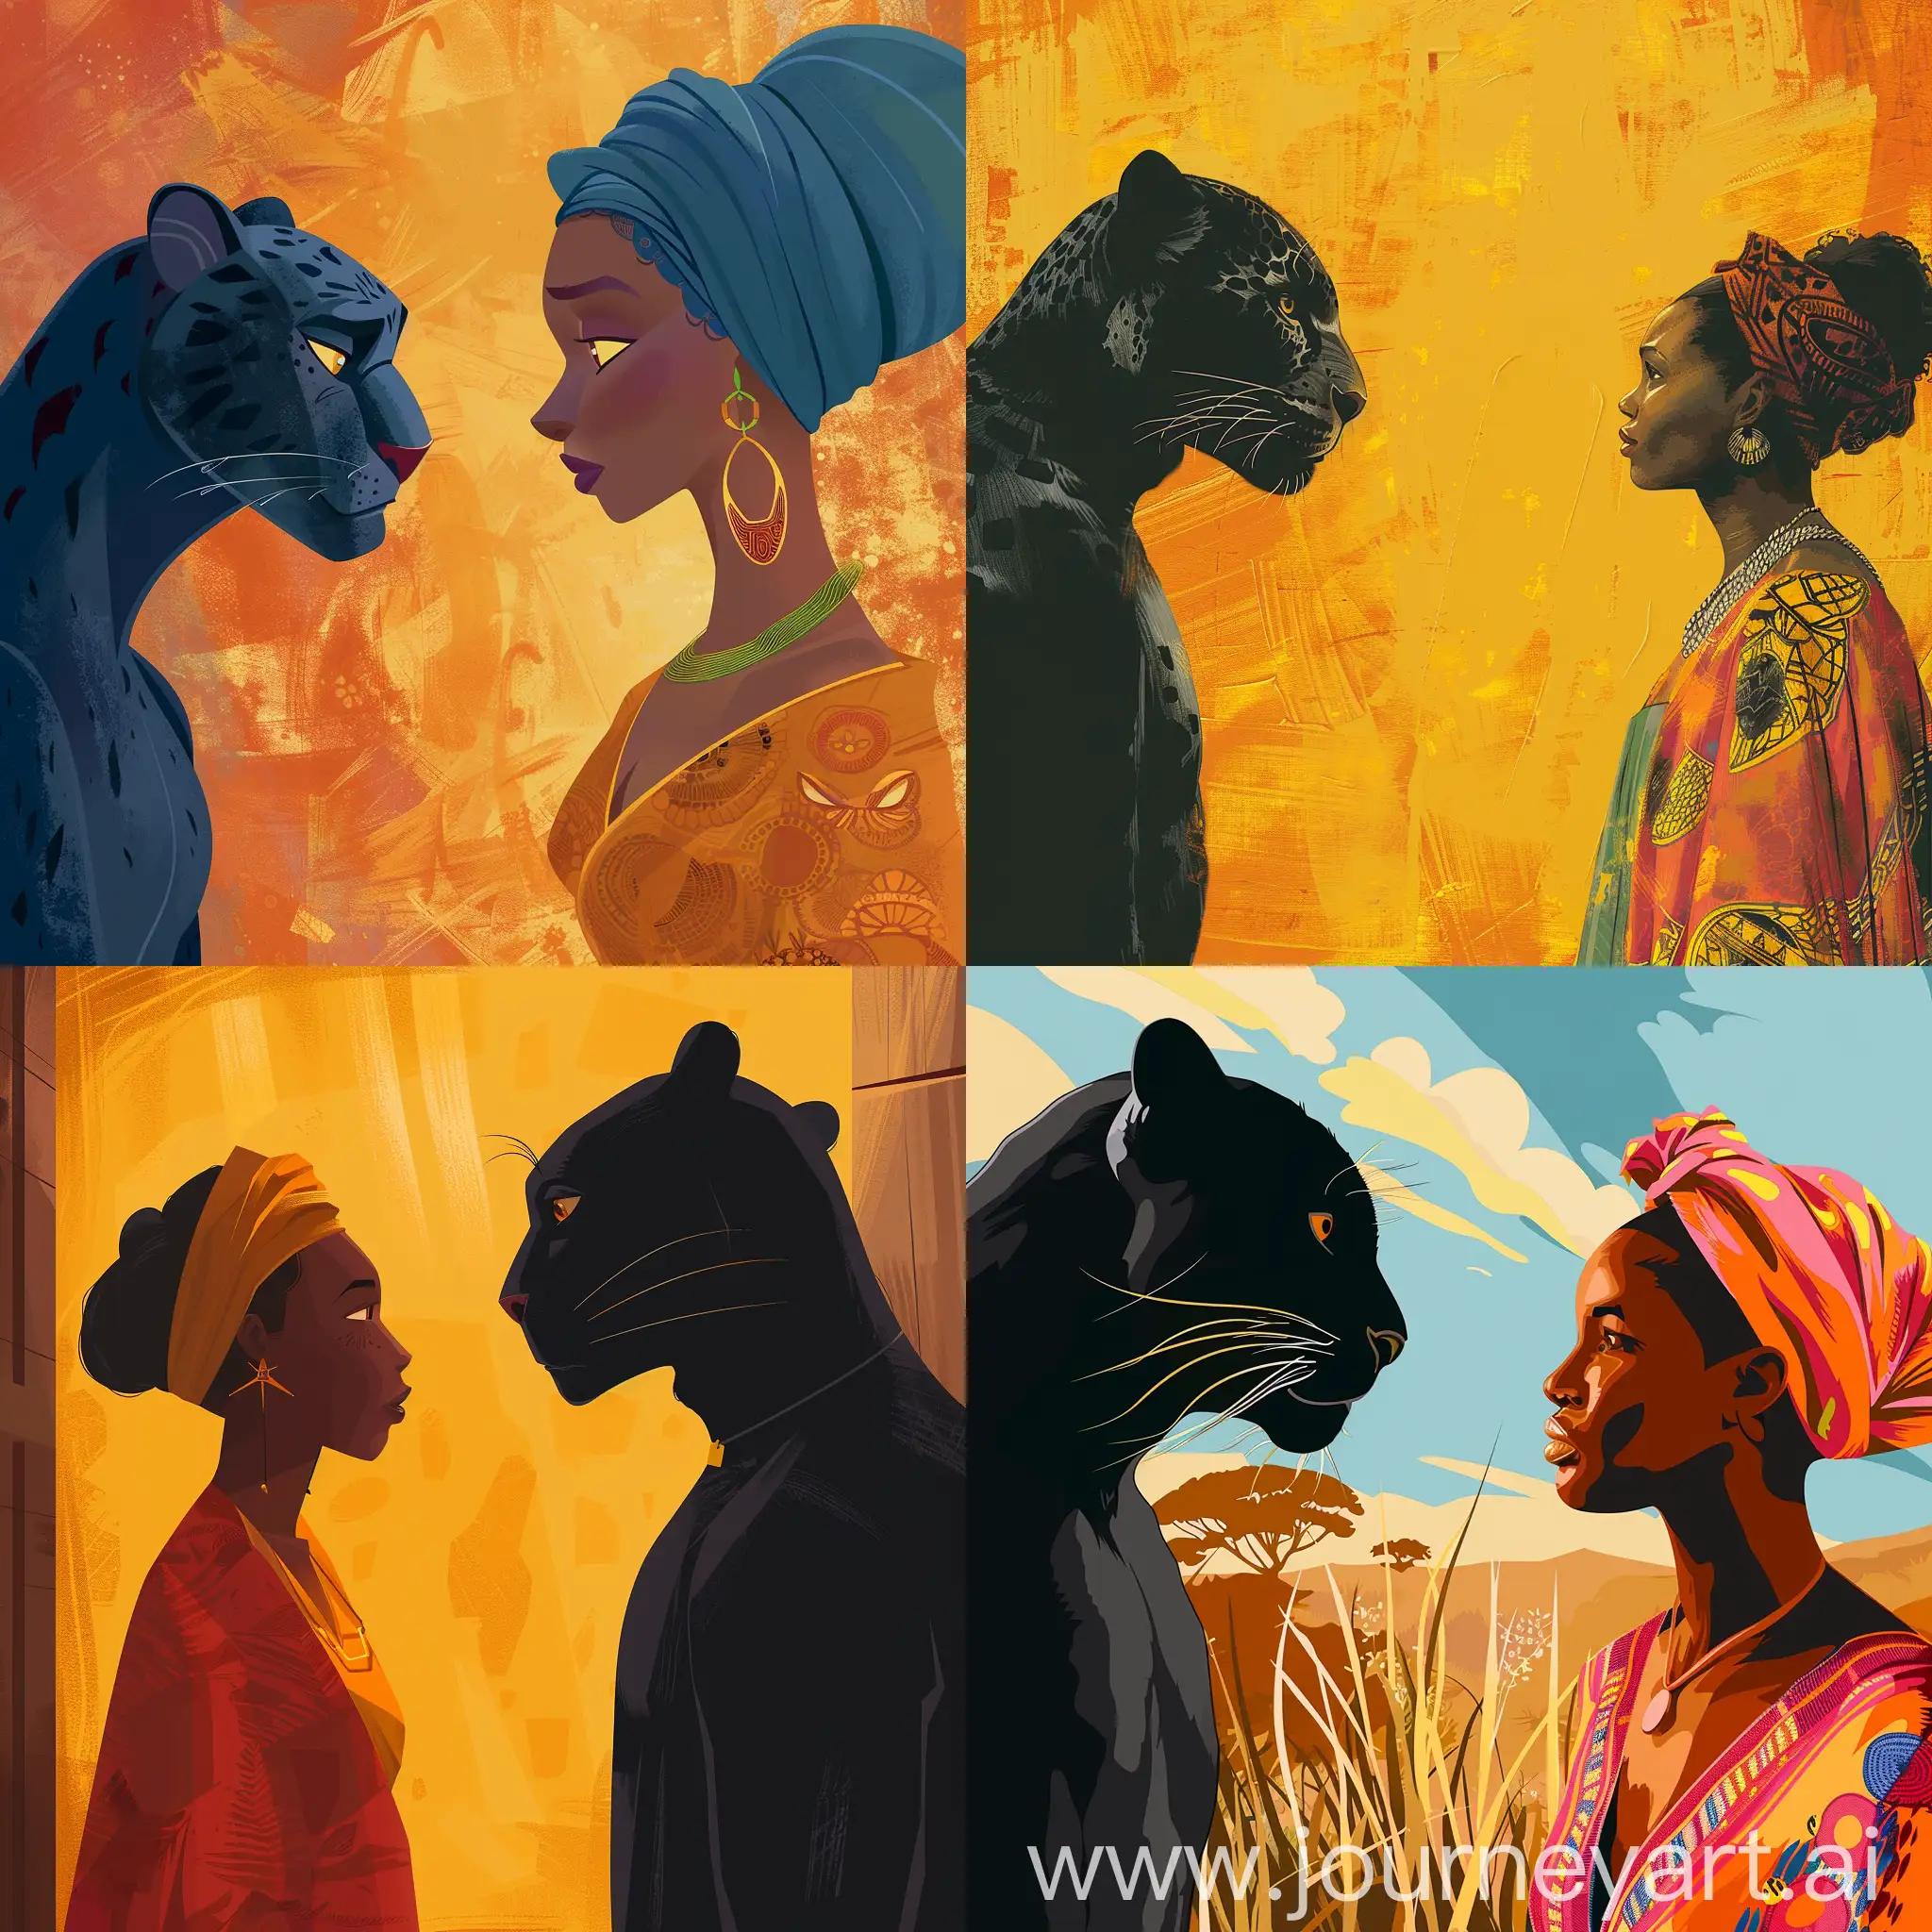 Passionate-Black-Panther-Gazing-at-African-Woman-Illustration-in-Flat-Style